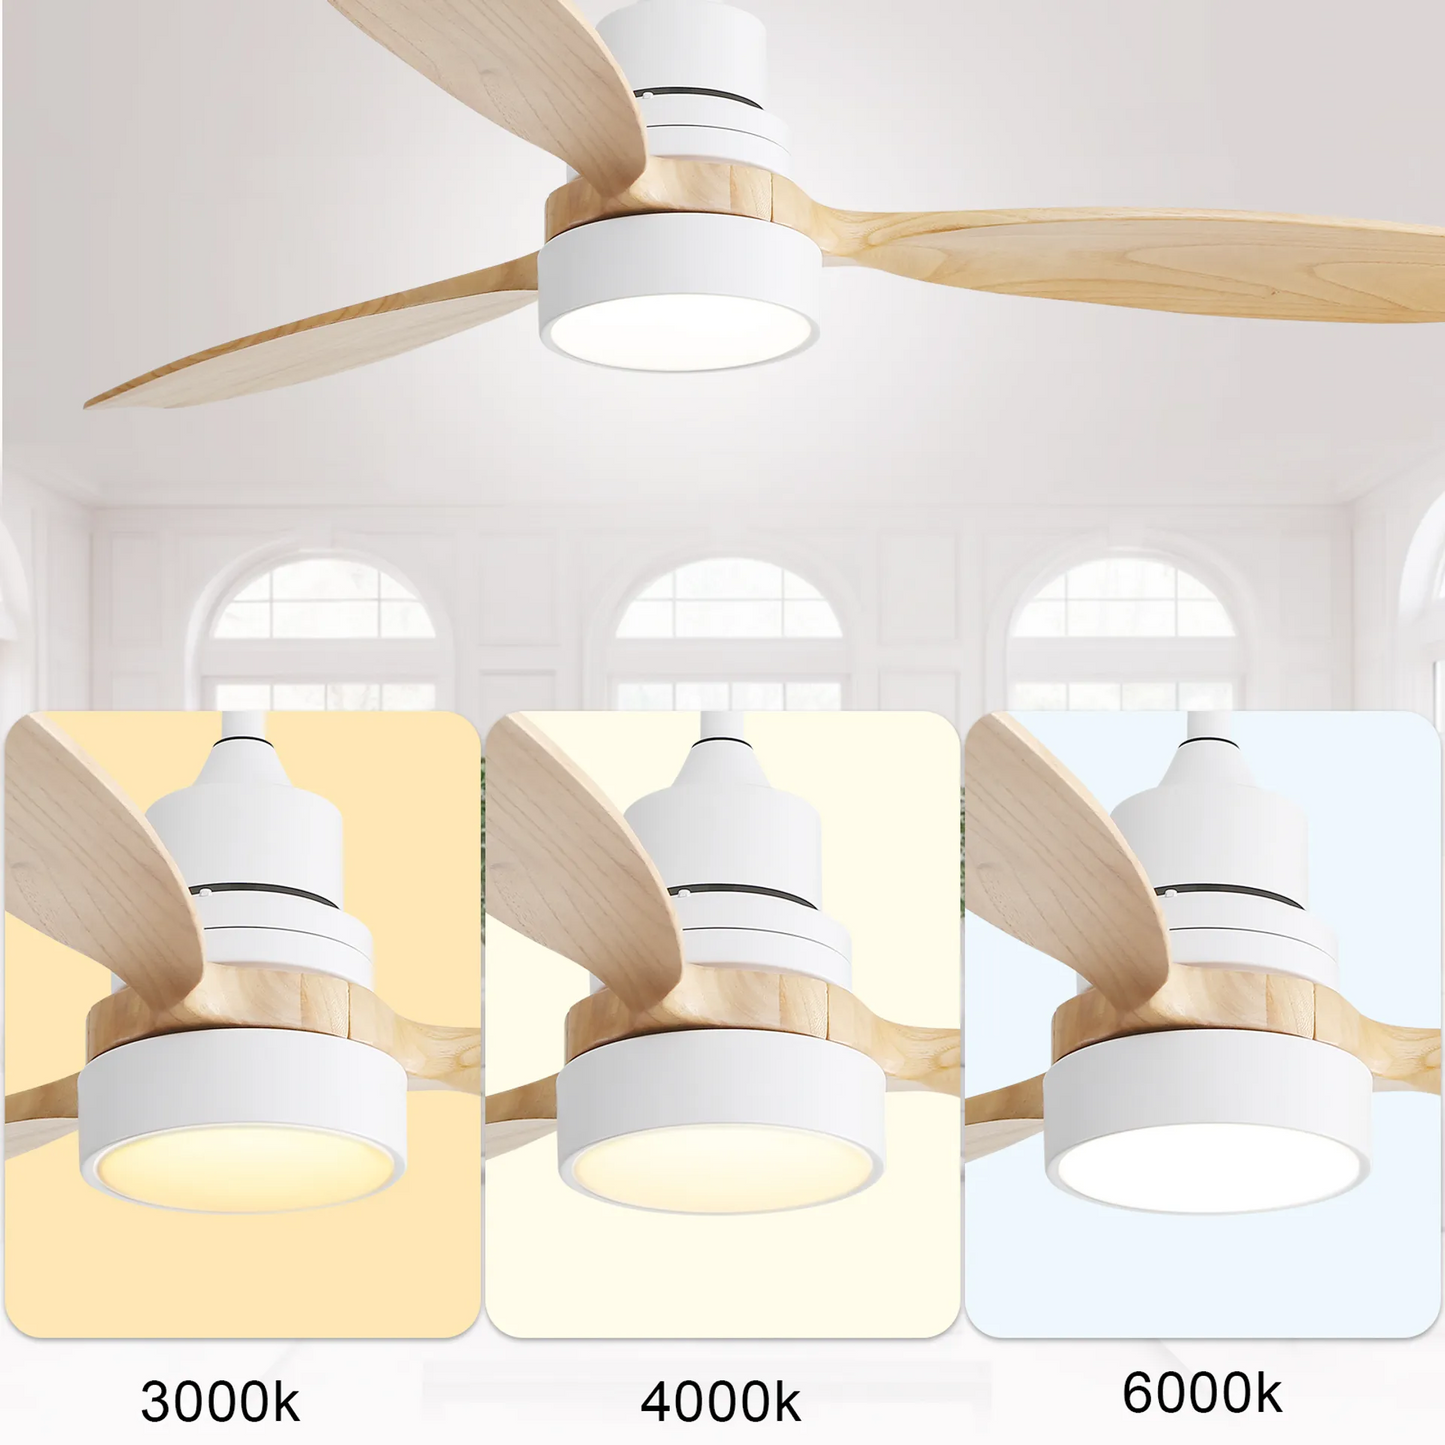 Modern Wood 52 Ceiling Fan with 6 Speed Remote Control for Bedroom